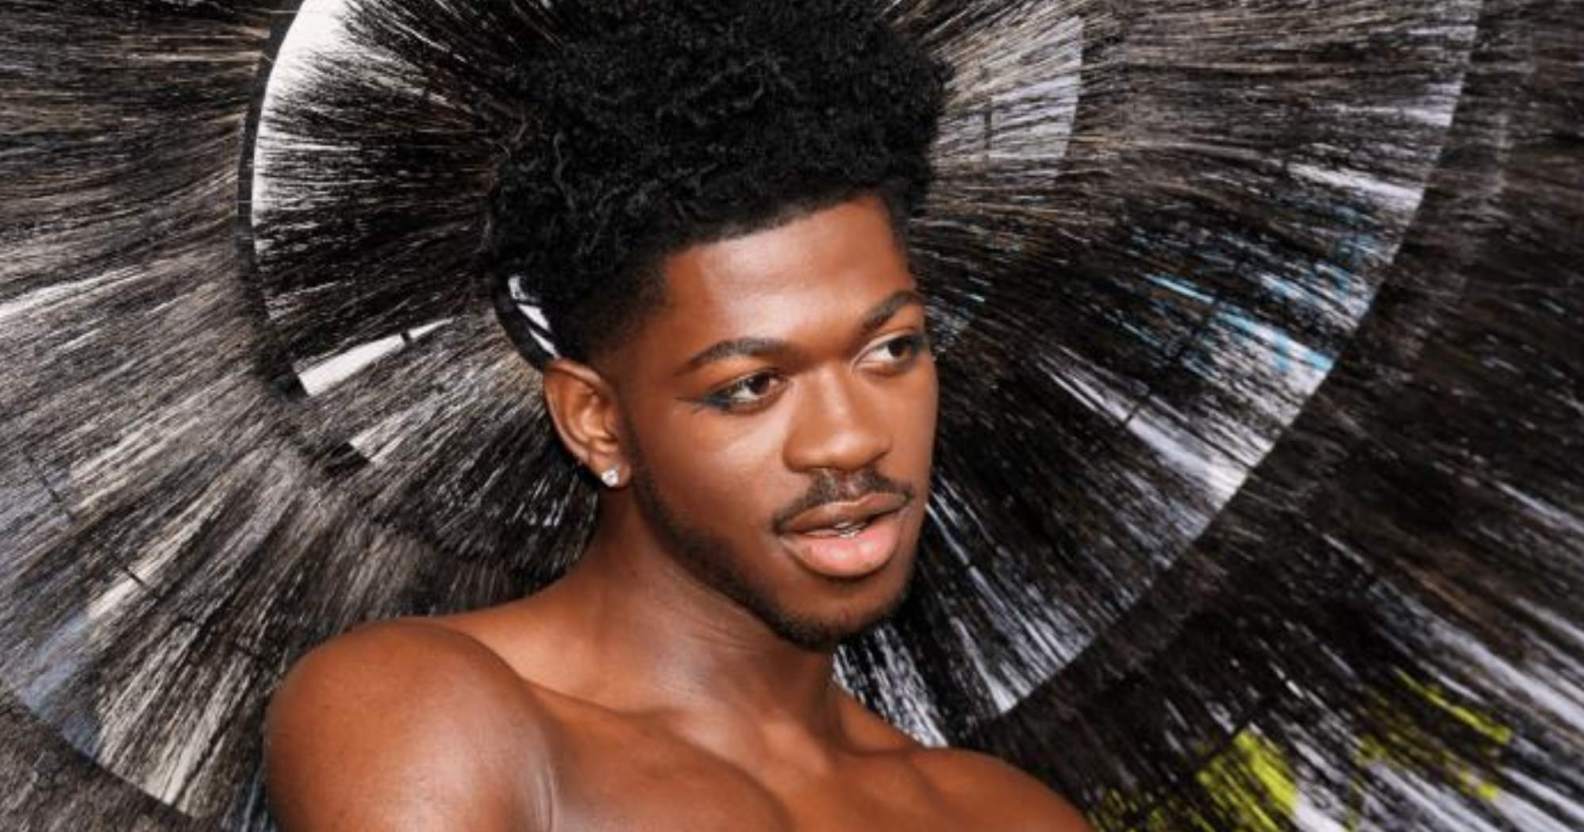 Lil Nas X wears a feathered headpiece as he poses for a photo